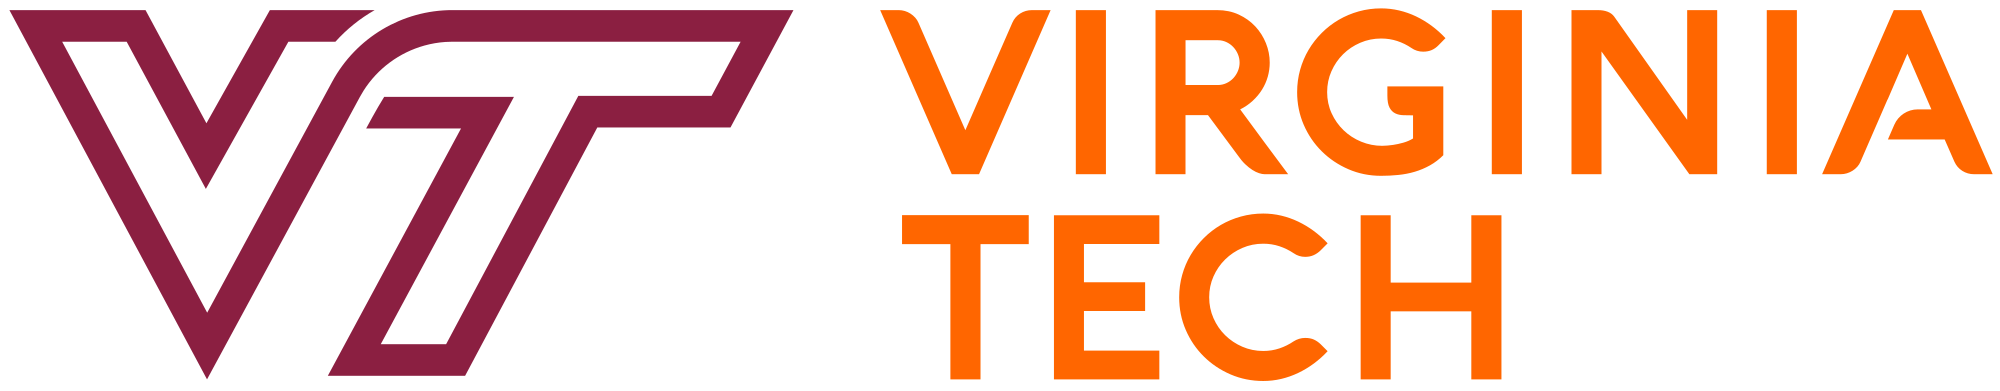 Image result for virginia tech